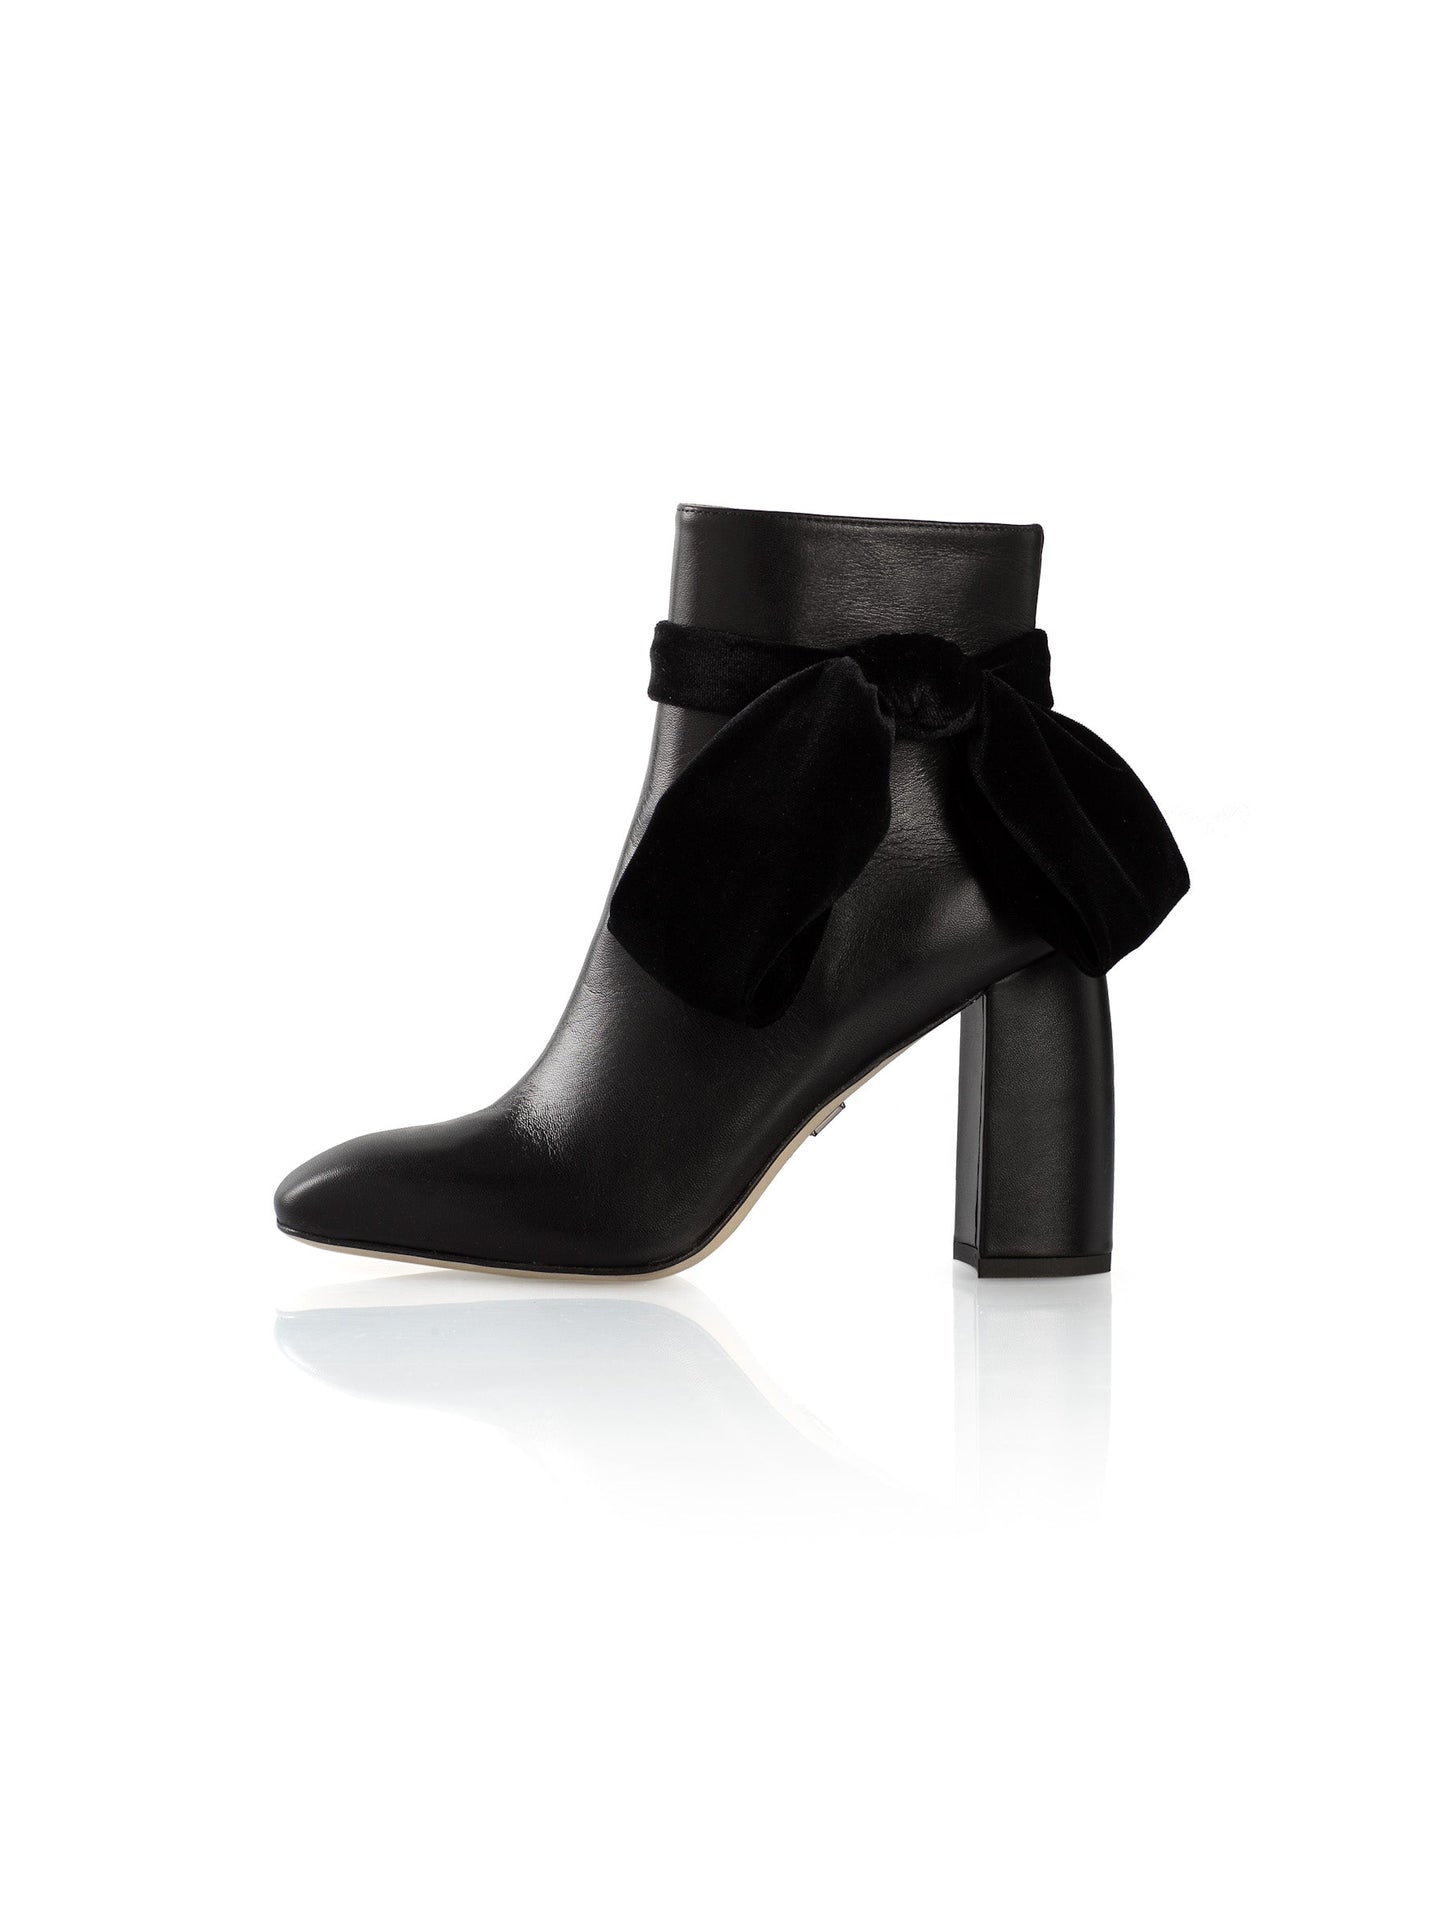 Flora Bootie in Black Nappa Leather with Velvet Bow